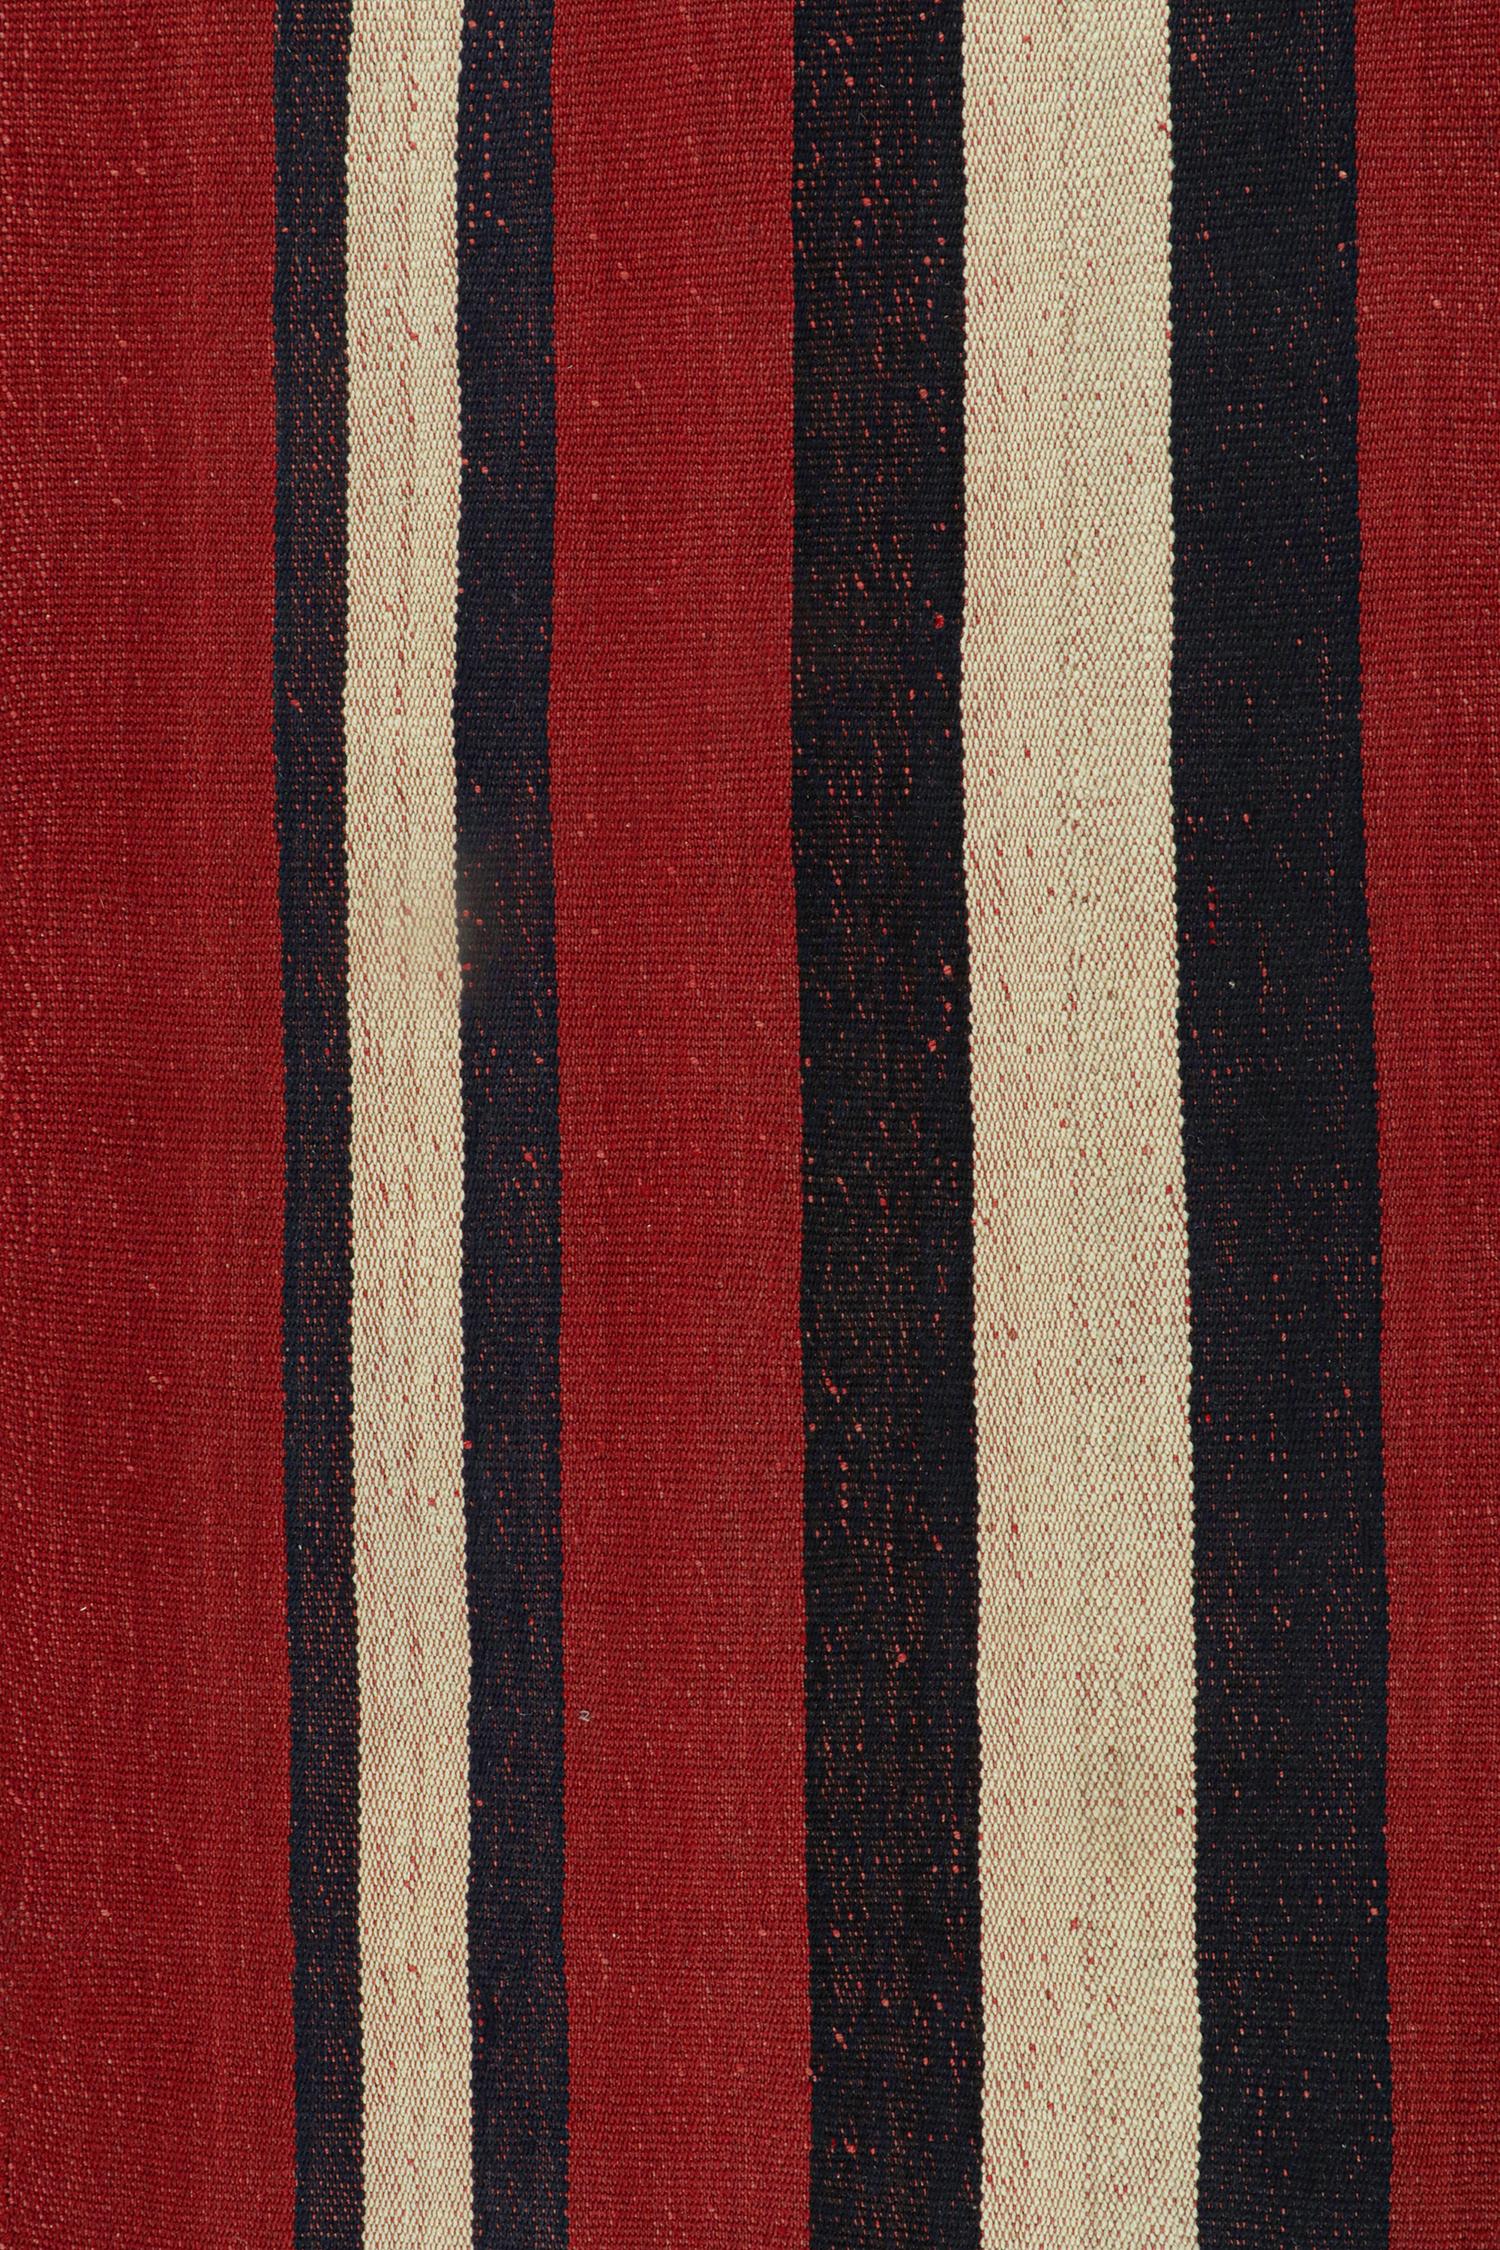 Mid-20th Century Vintage Persian Kilim with Red, Blue, and Off-White Stripes For Sale